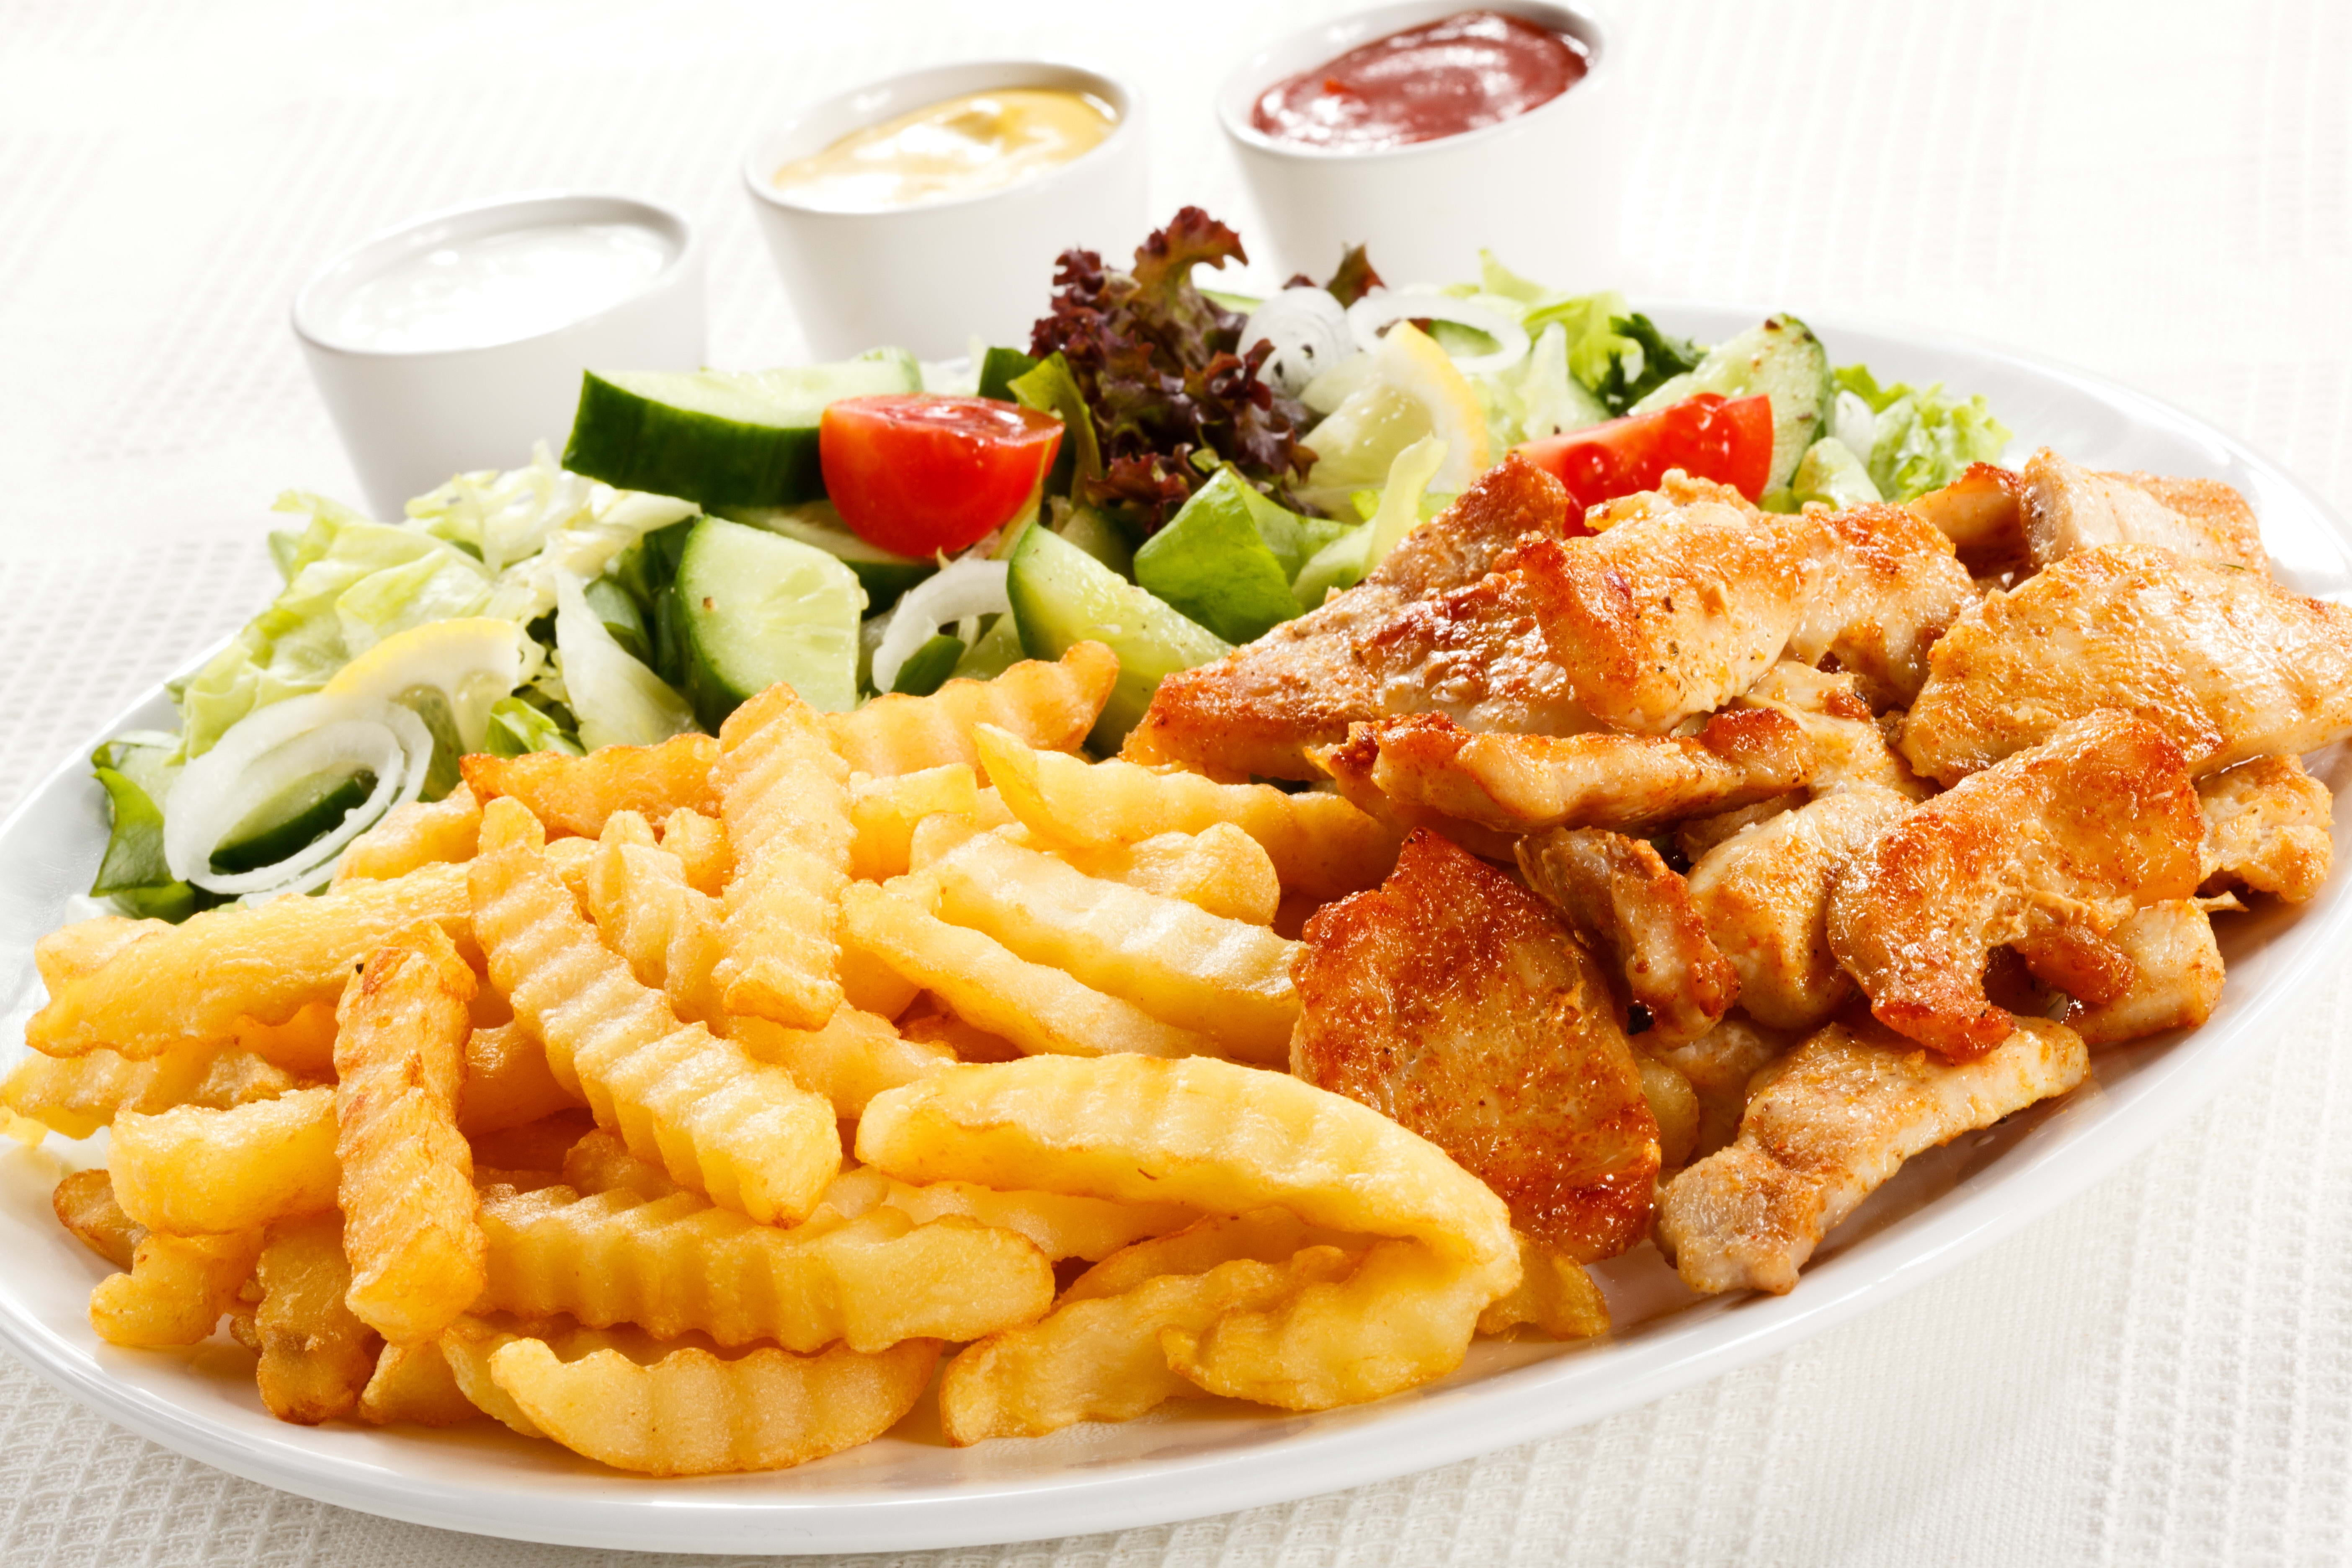 potato fries and vegetable salad, potato dish, meat, spices, food